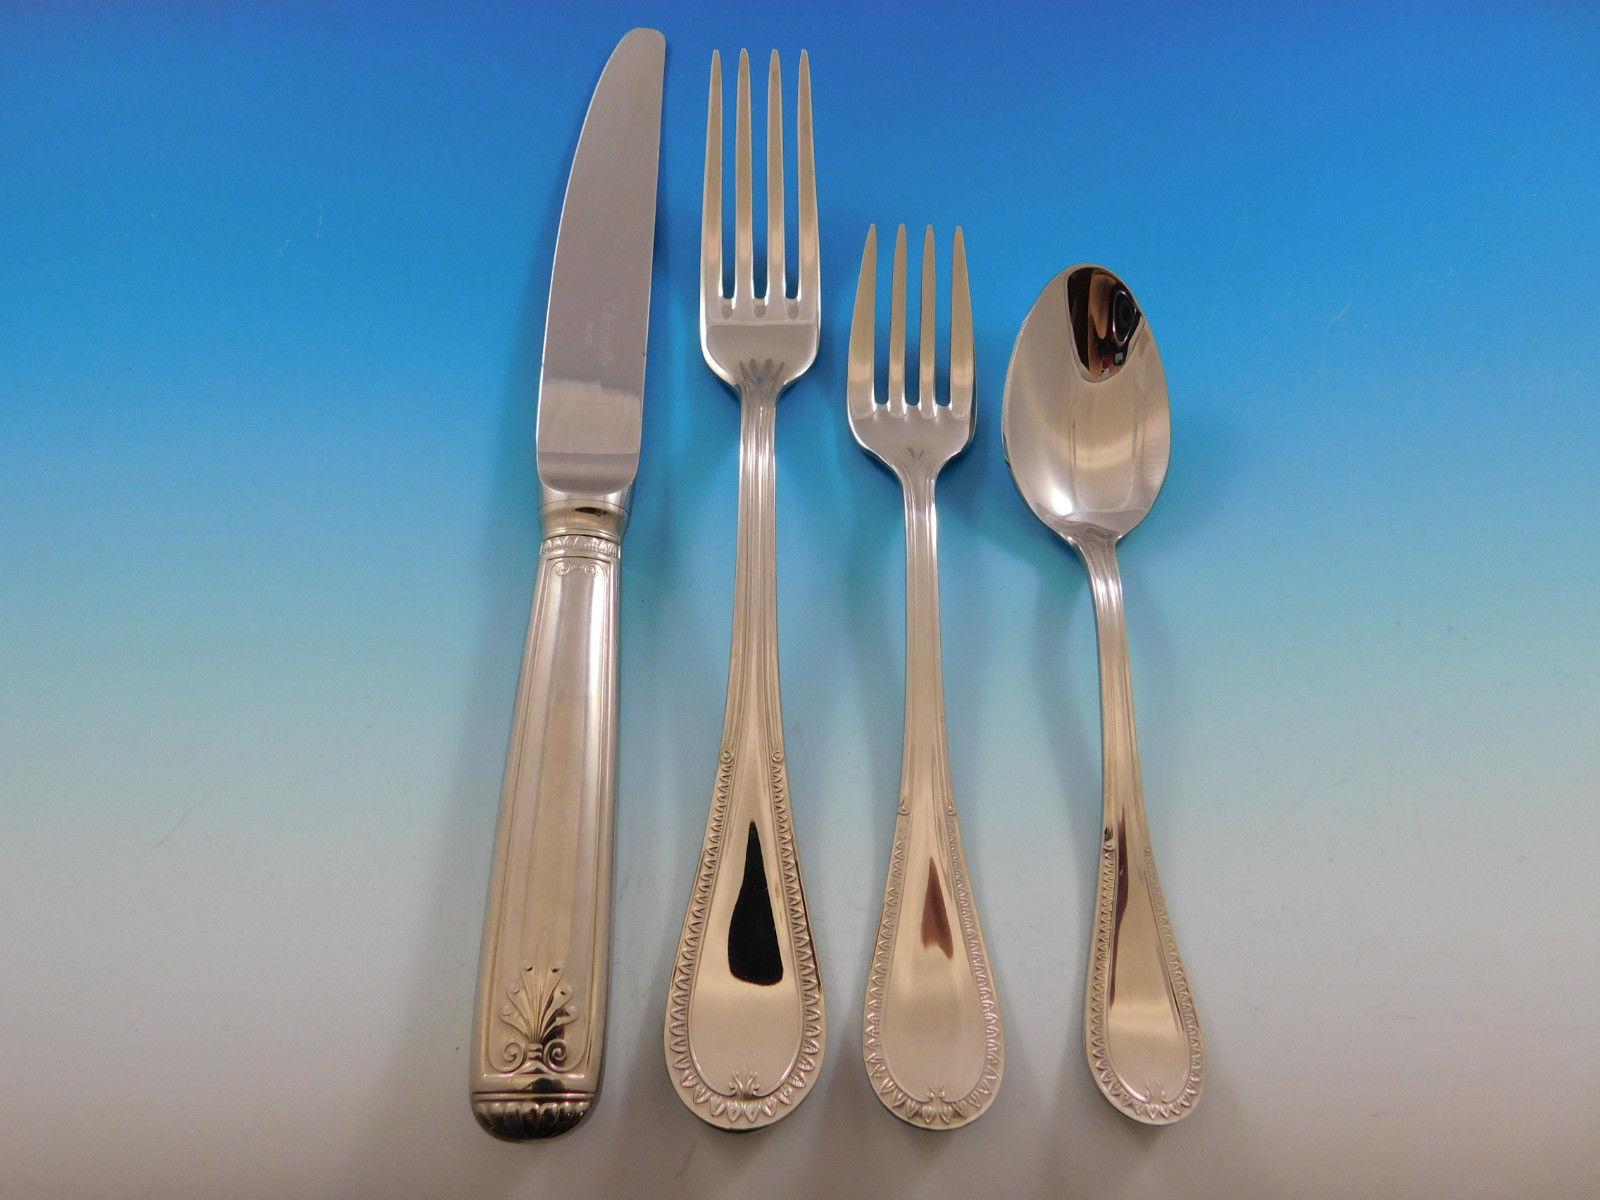 christofle stainless steel flatware patterns